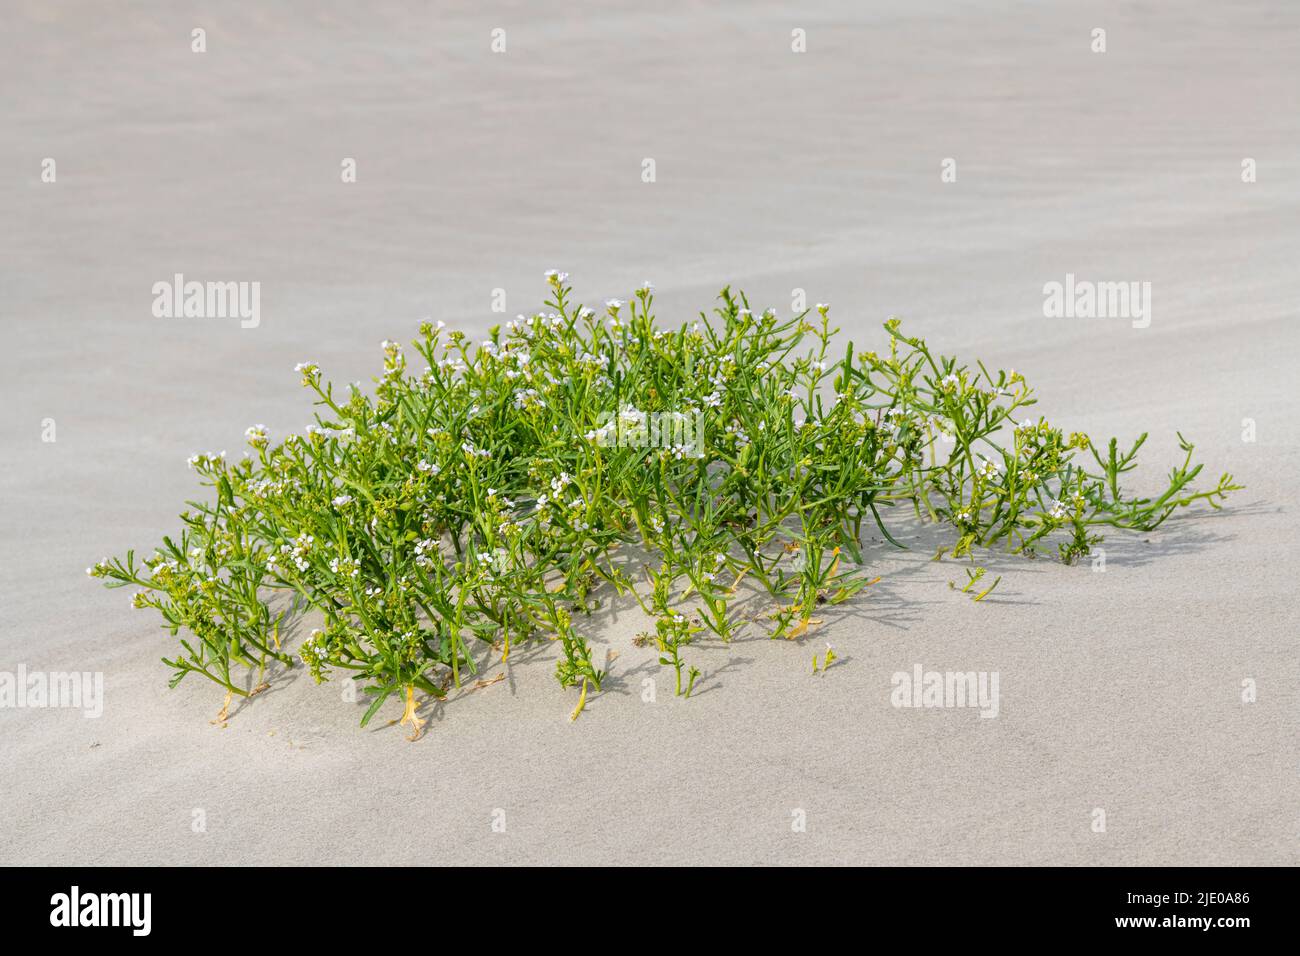 Plant on the beach of Terschelling called Sea rocket Cakile maritima with white flowers Stock Photo